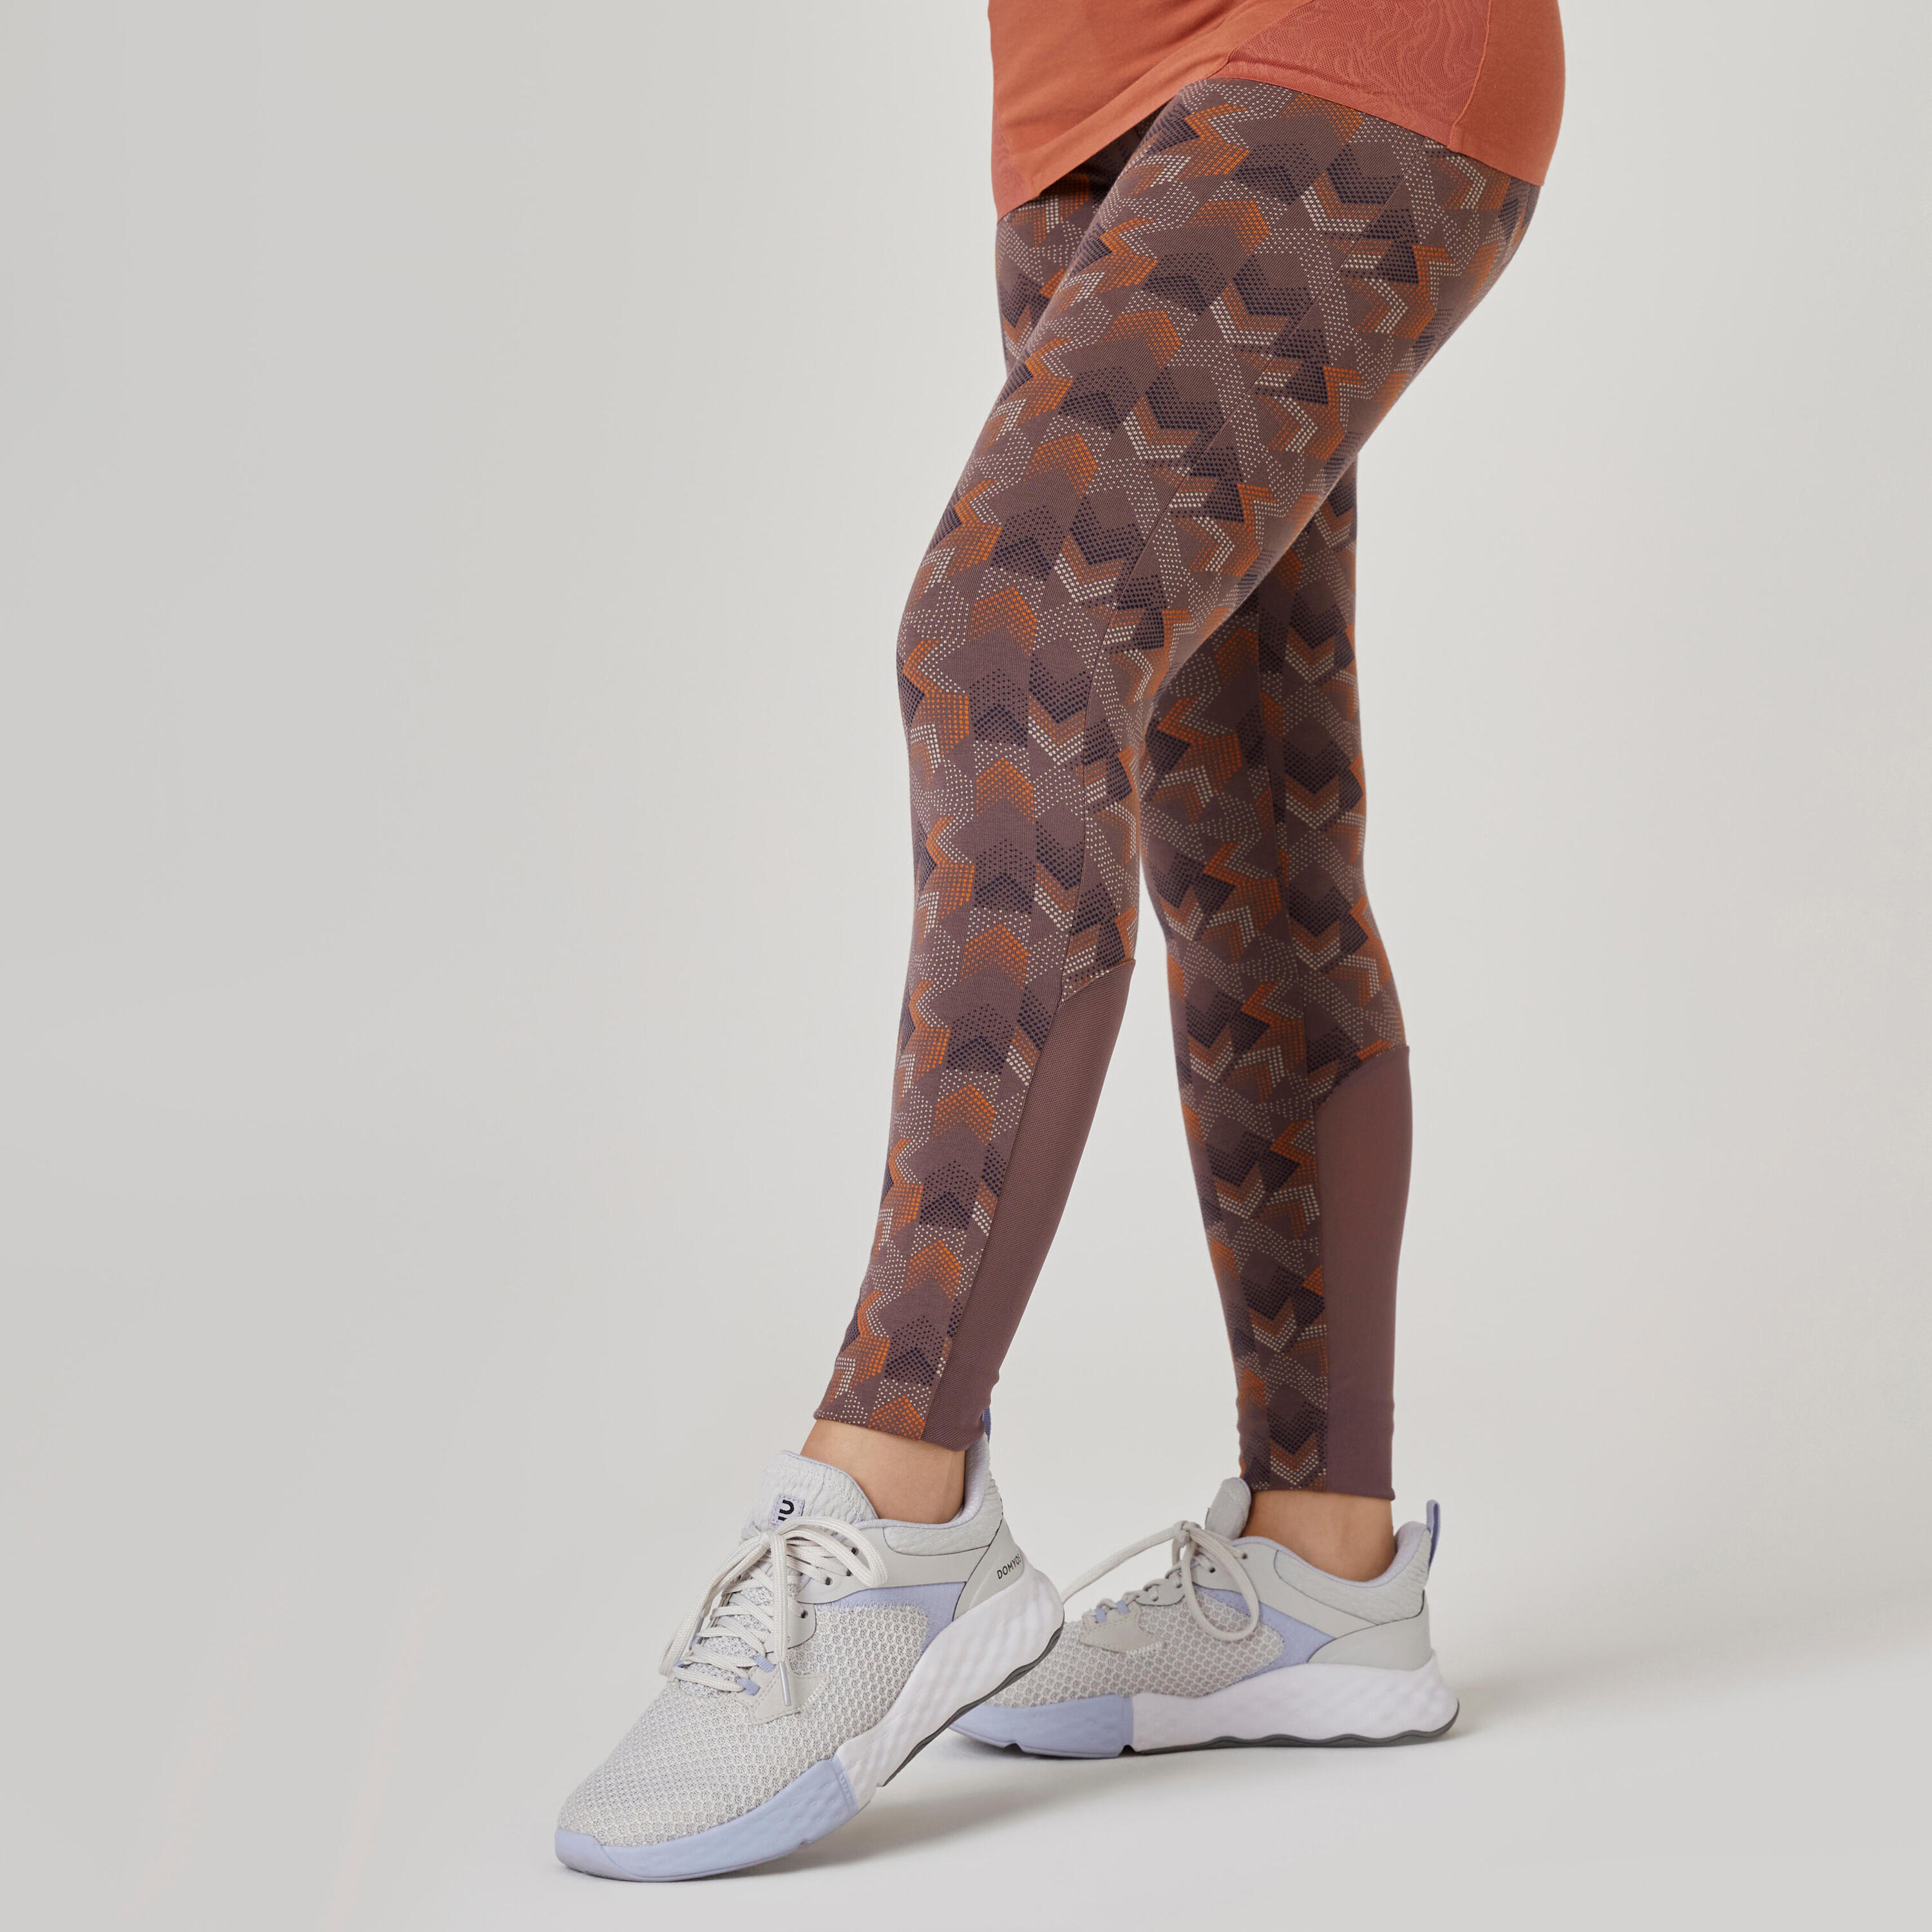 Stretchy High-Waisted Cotton Fitness Leggings with Mesh - Brown Print  DOMYOS